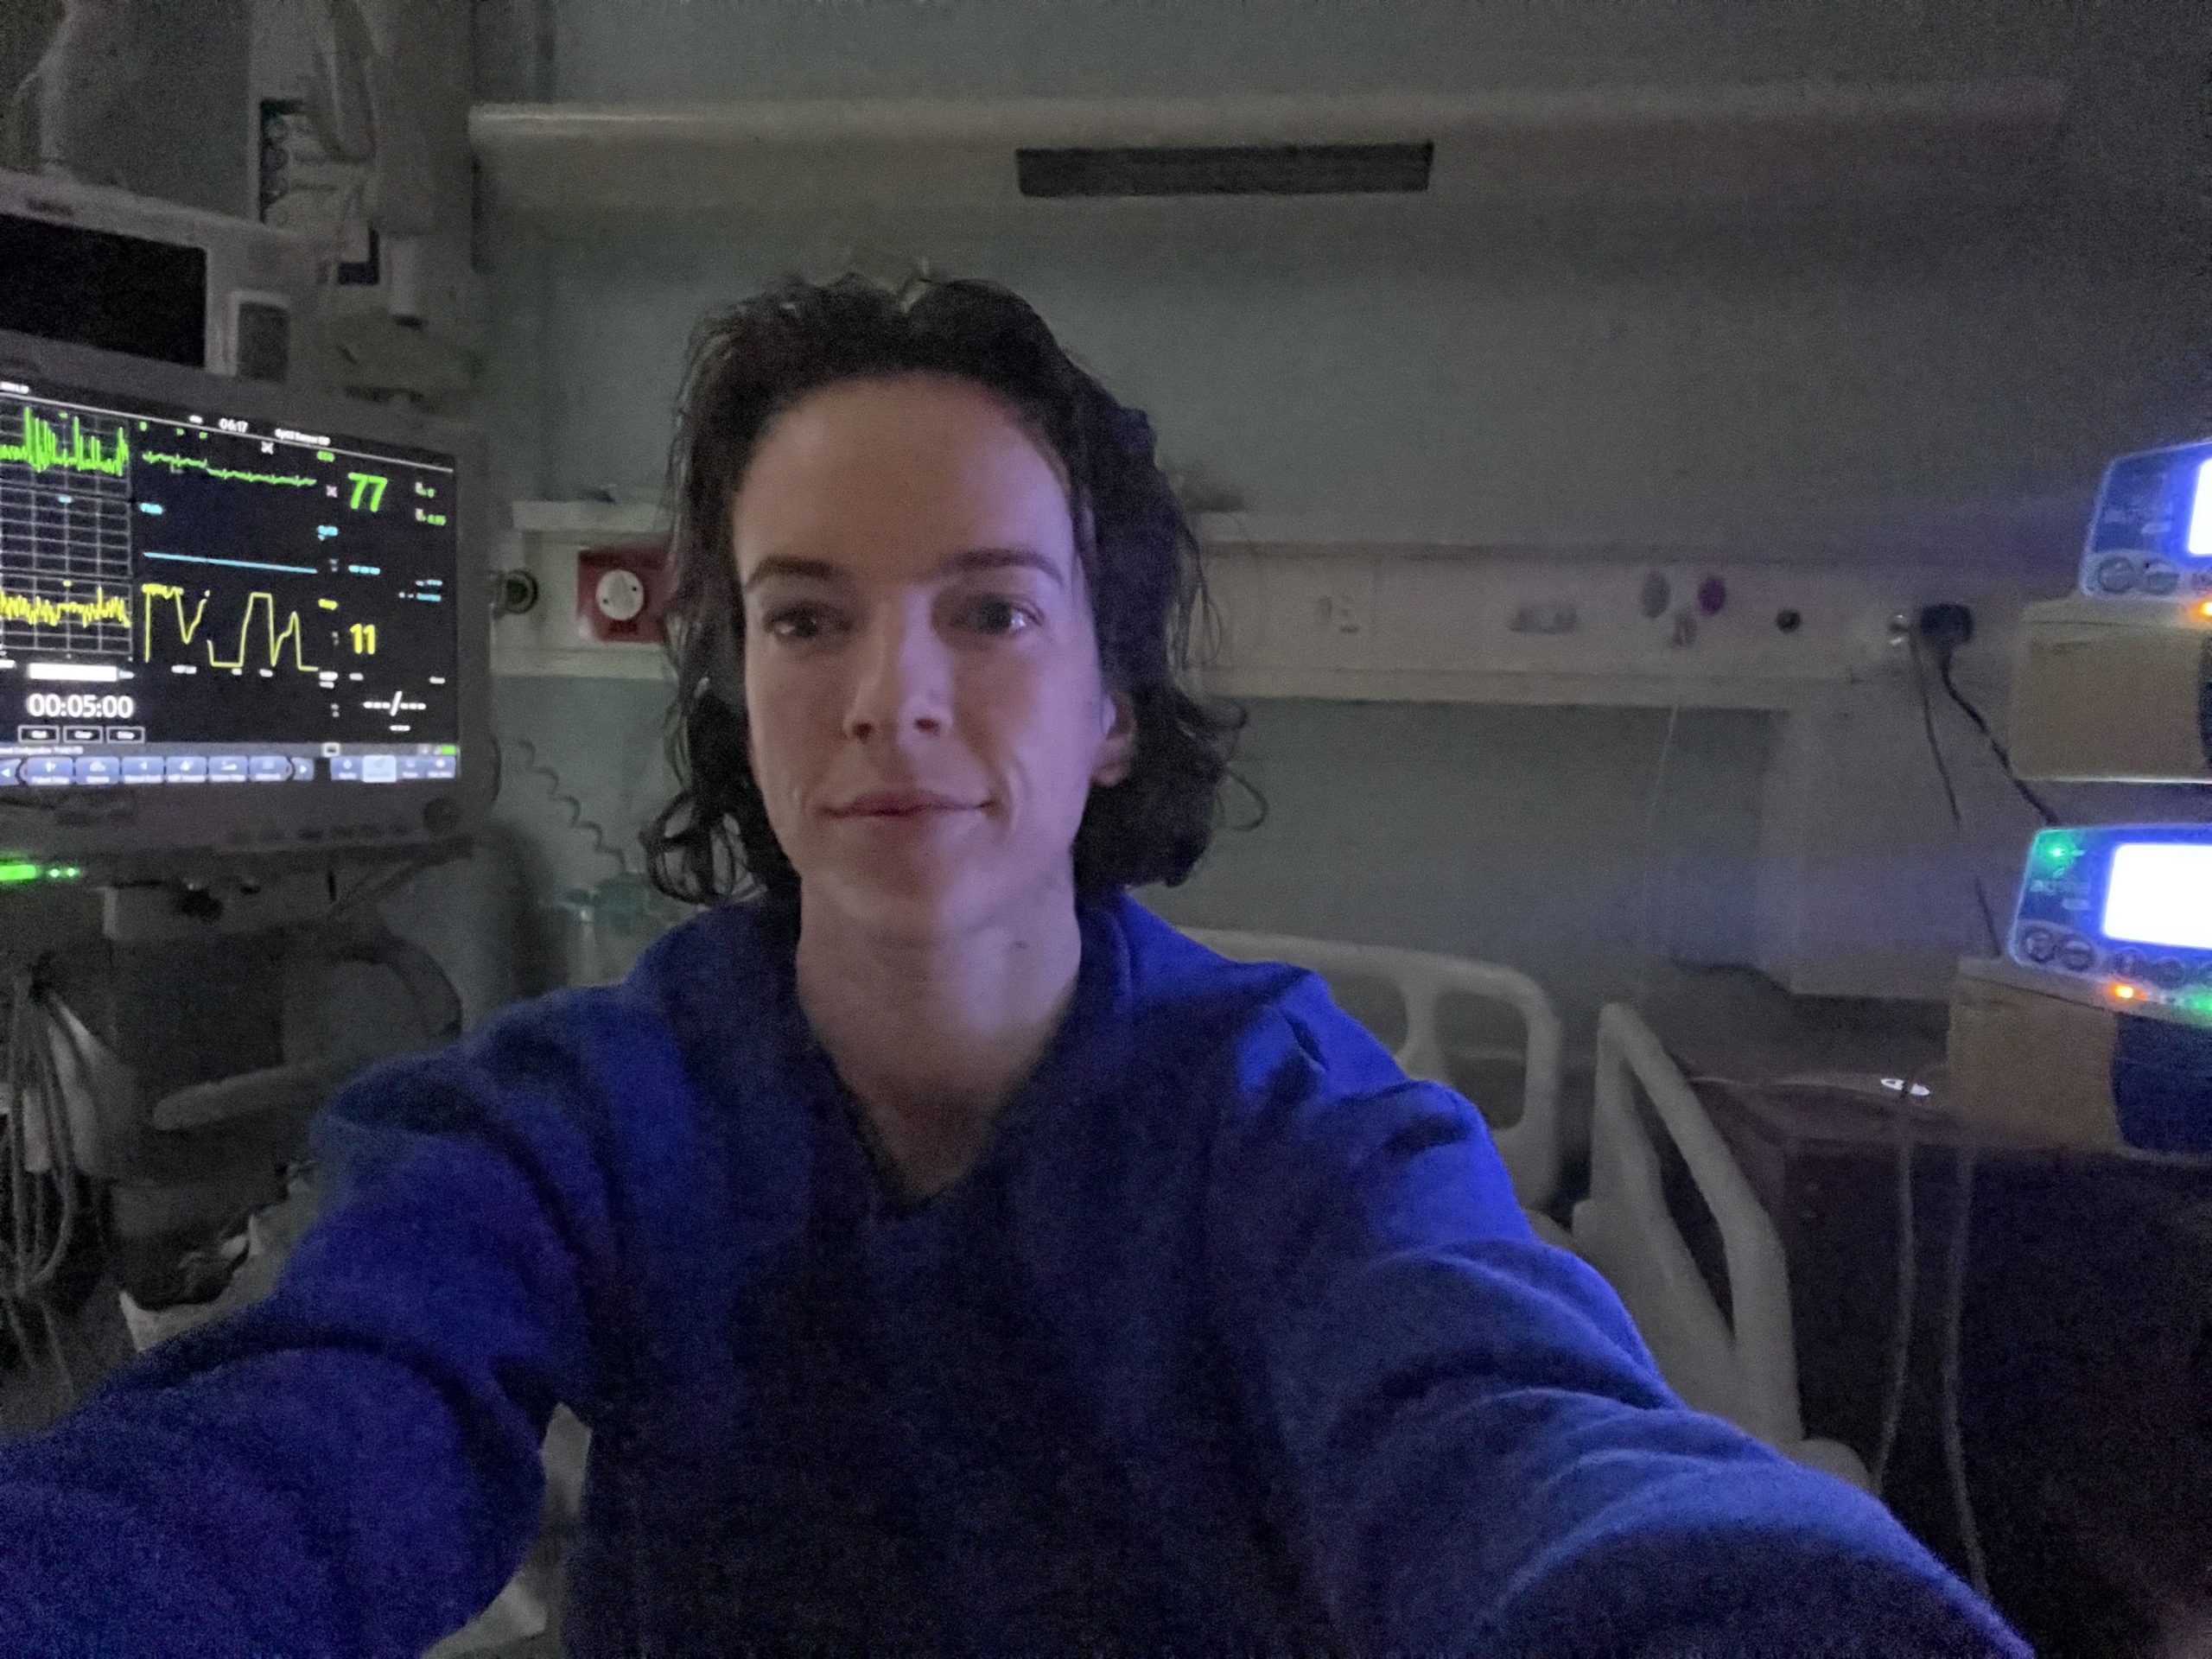 A photo of Dr Amber. She takes the photo of herself with her arms stretched out. She wears a blue, medical jacket in a hospital room